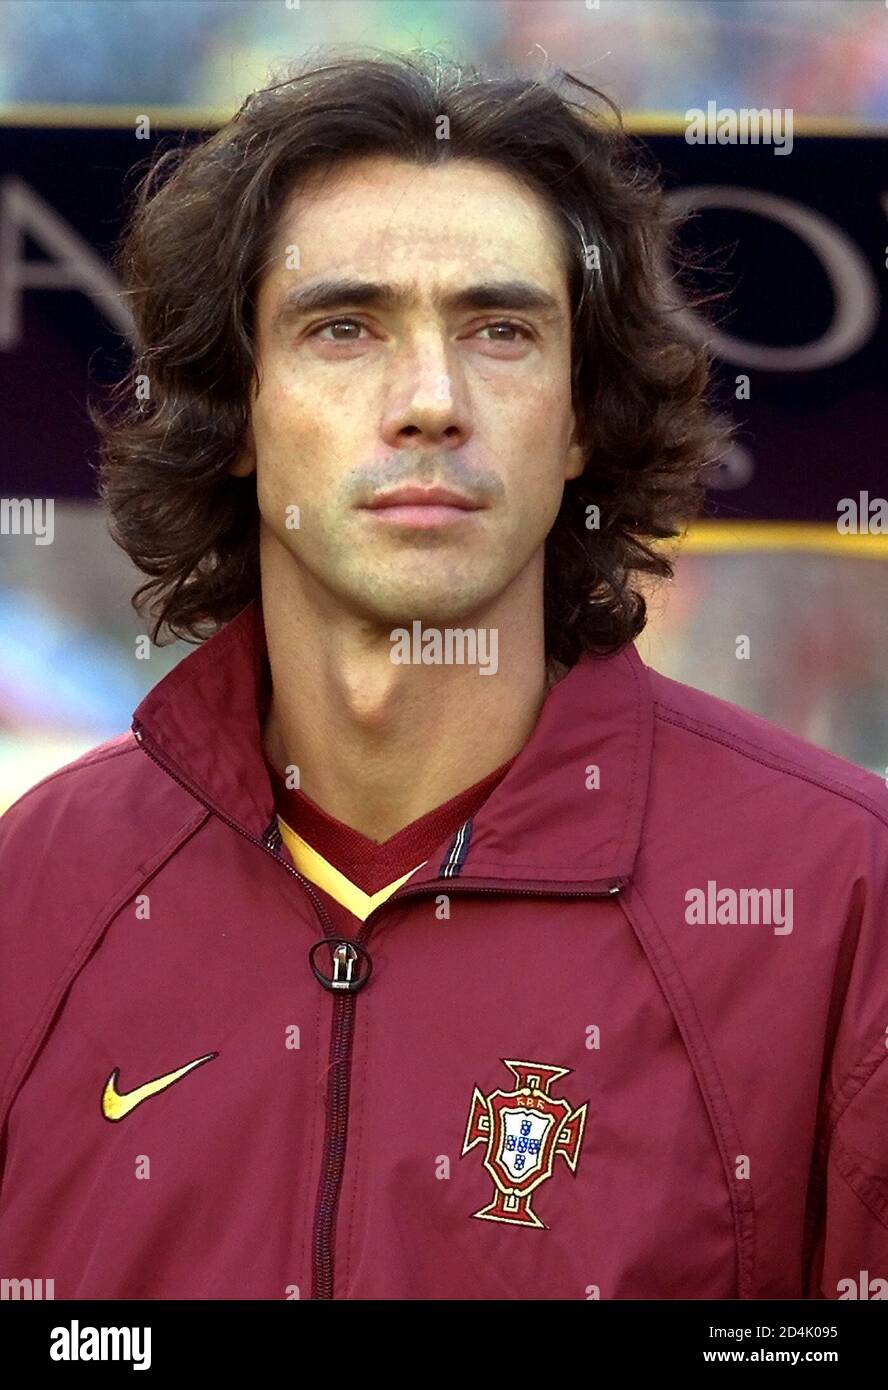 Wcup World Cup 2002 Preview Headshots Portugal S Paulo Sousa Lines Up For The National Anthem In Lisbon October 6 2001 Reuters Jose Manuel Ribeiro Jr Aa Stock Photo Alamy